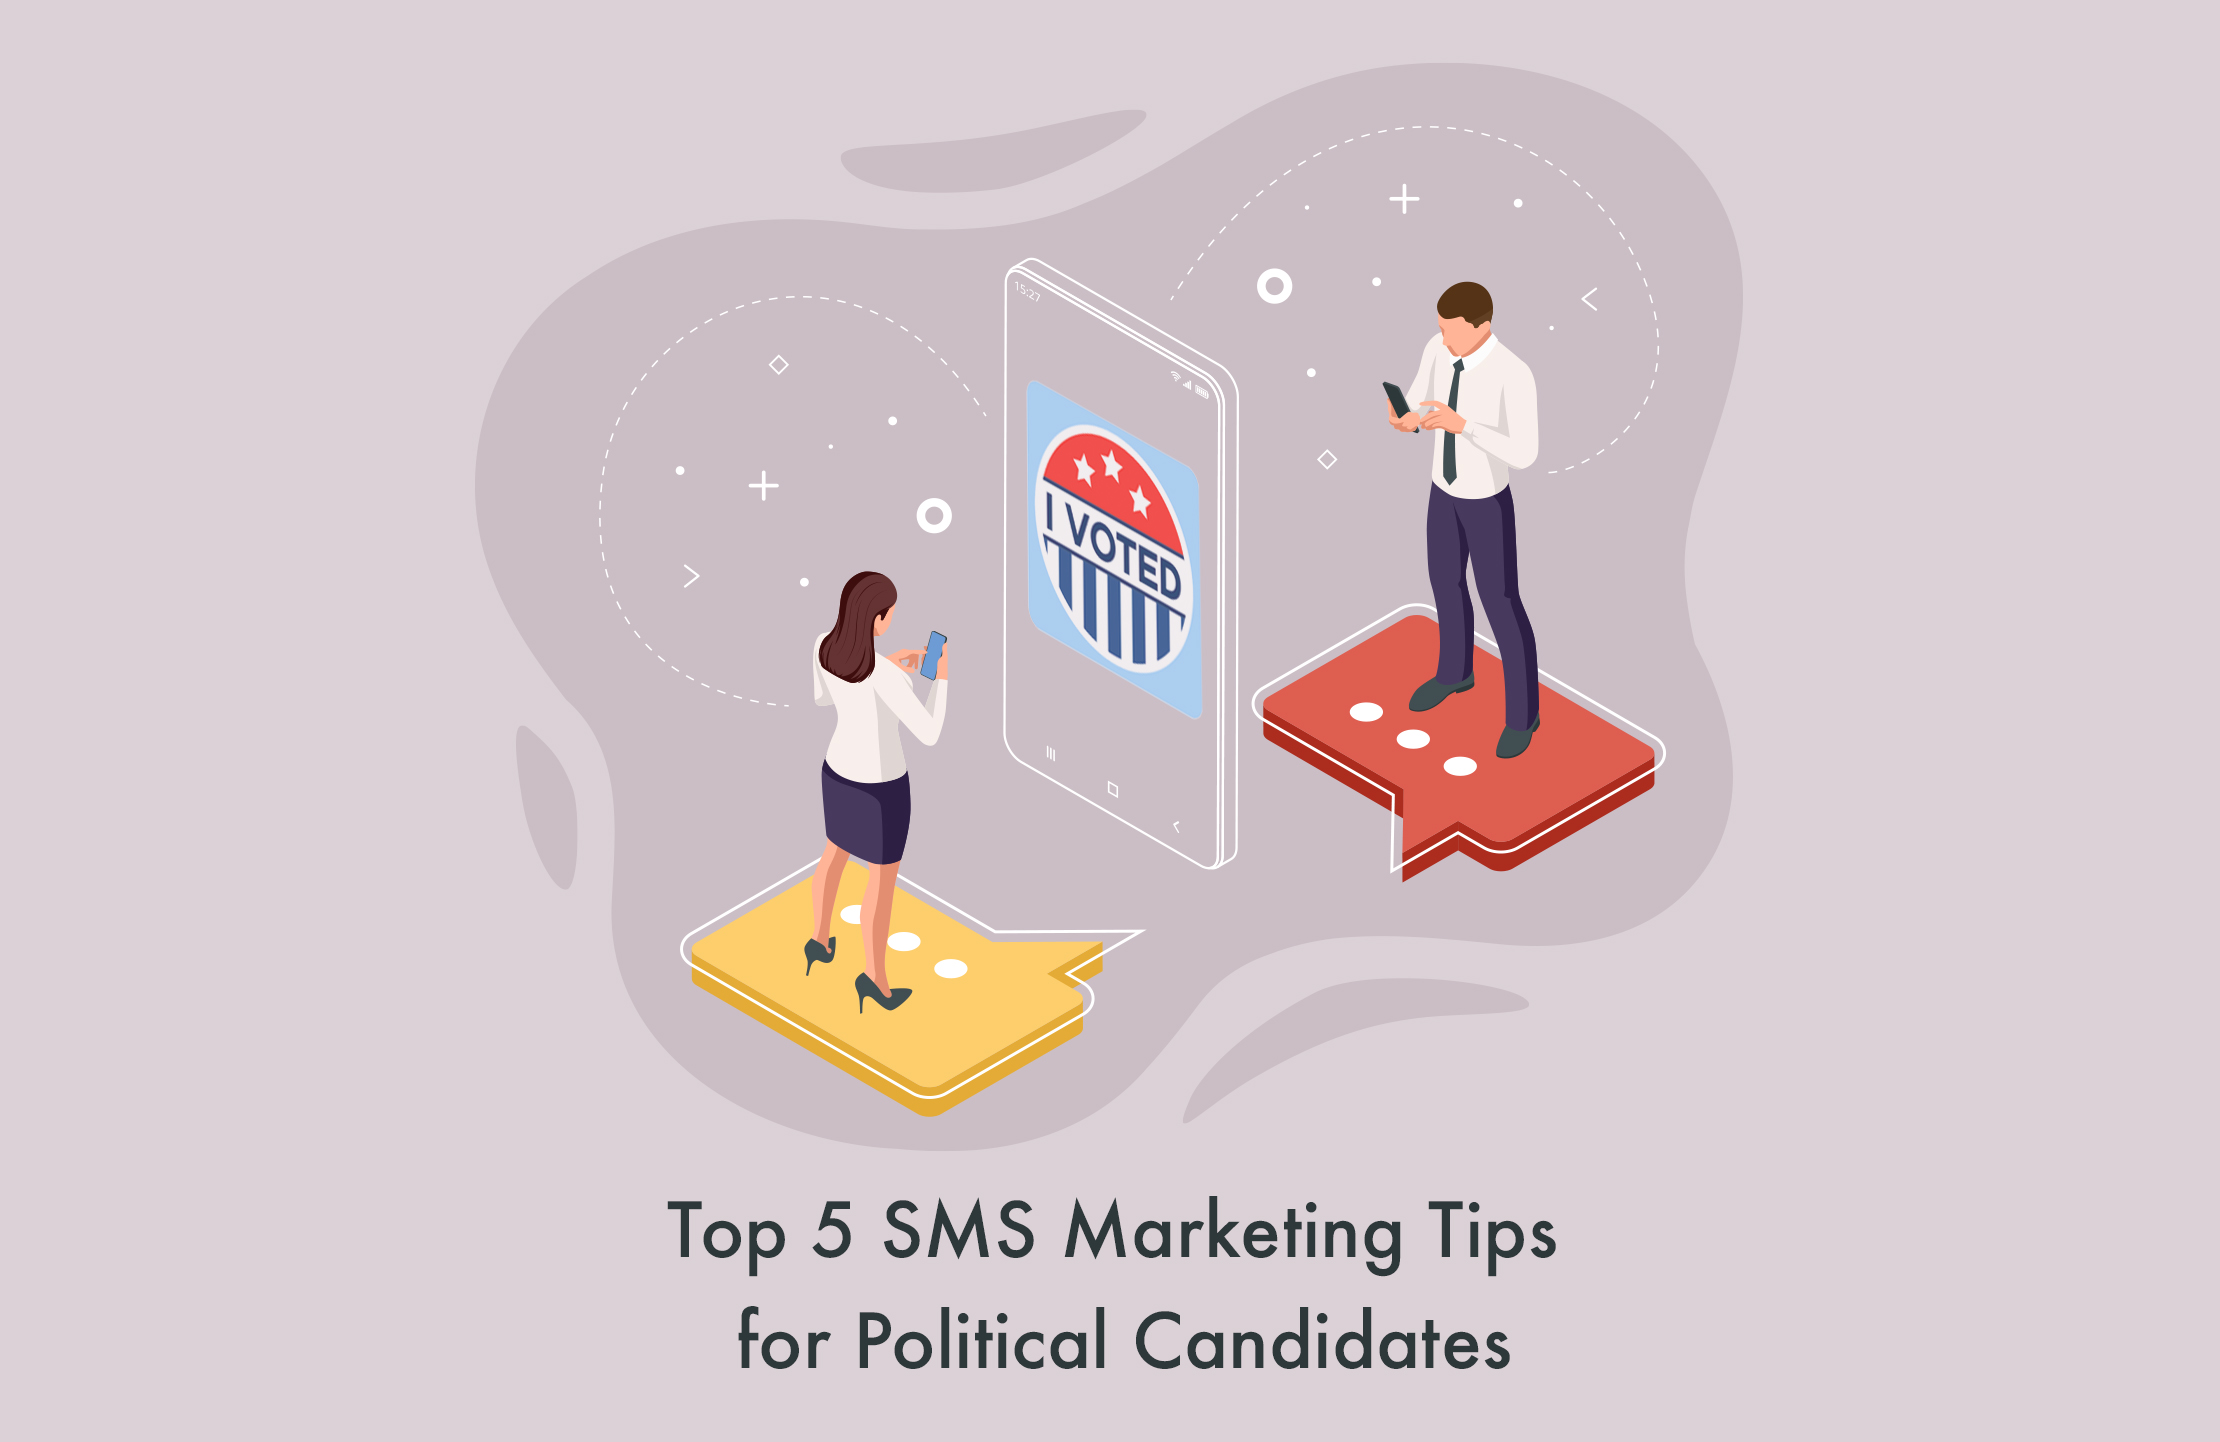 Top 5 SMS Marketing Tips for Political Candidates